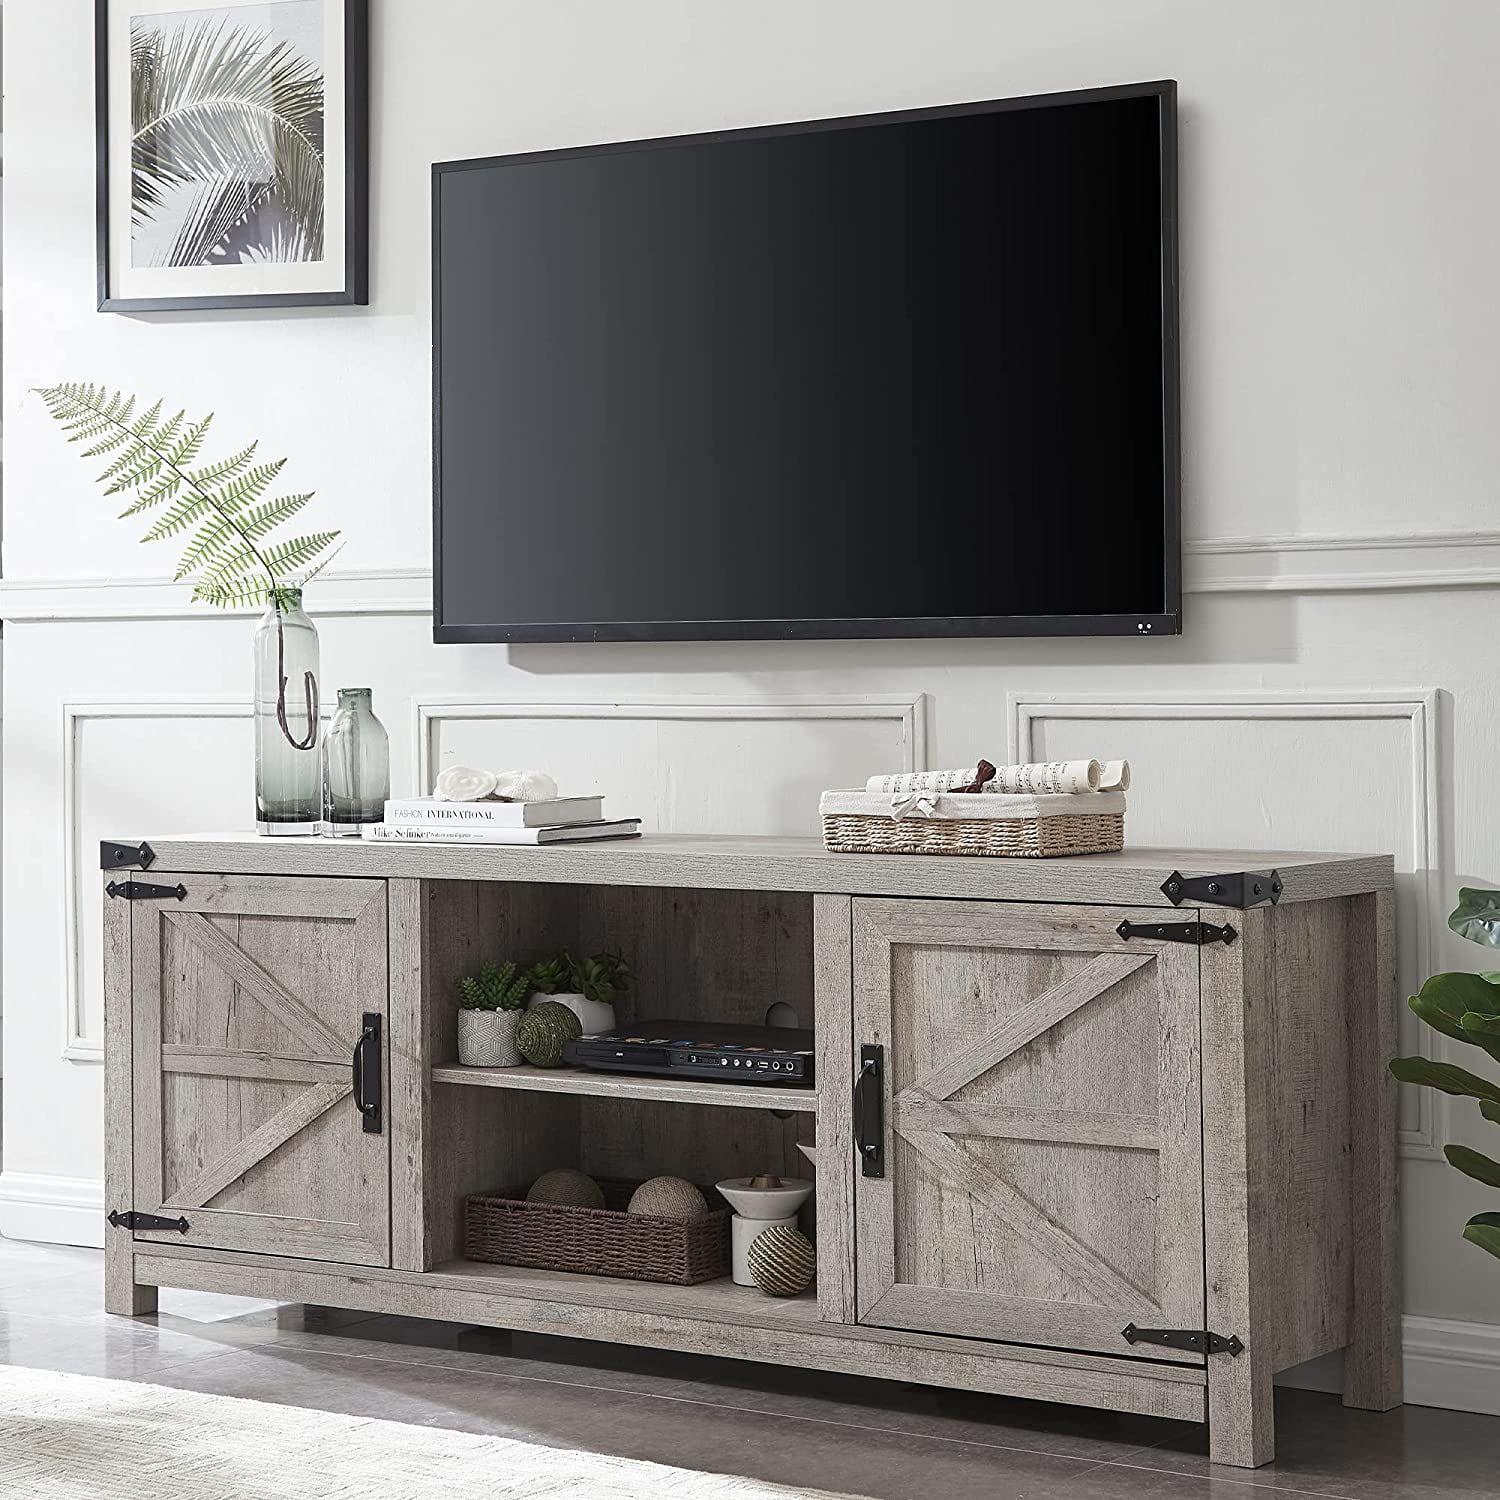 Okd Farmhouse Tv Stand For Tvs Up To 75 Inches, Wood Barn Door Media  Television Console Table With Storage Cabinets Shelves, Grey Wash –  Walmart Throughout Farmhouse Media Entertainment Centers (View 4 of 15)